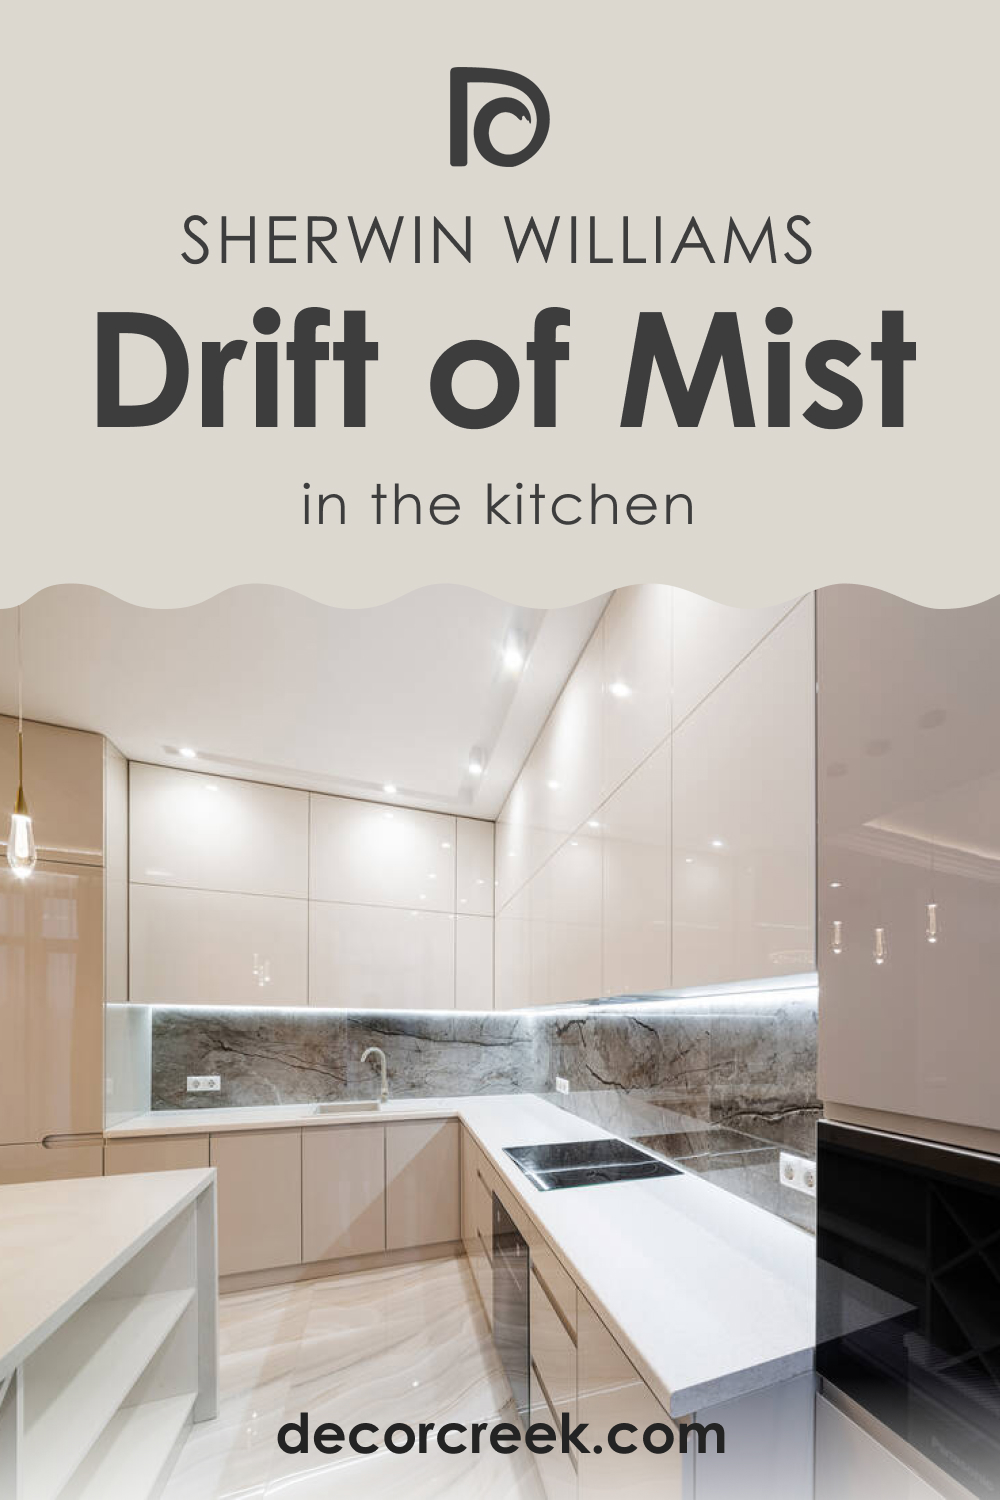 How to Use SW 9166 Drift of Mist for the Kitchen?